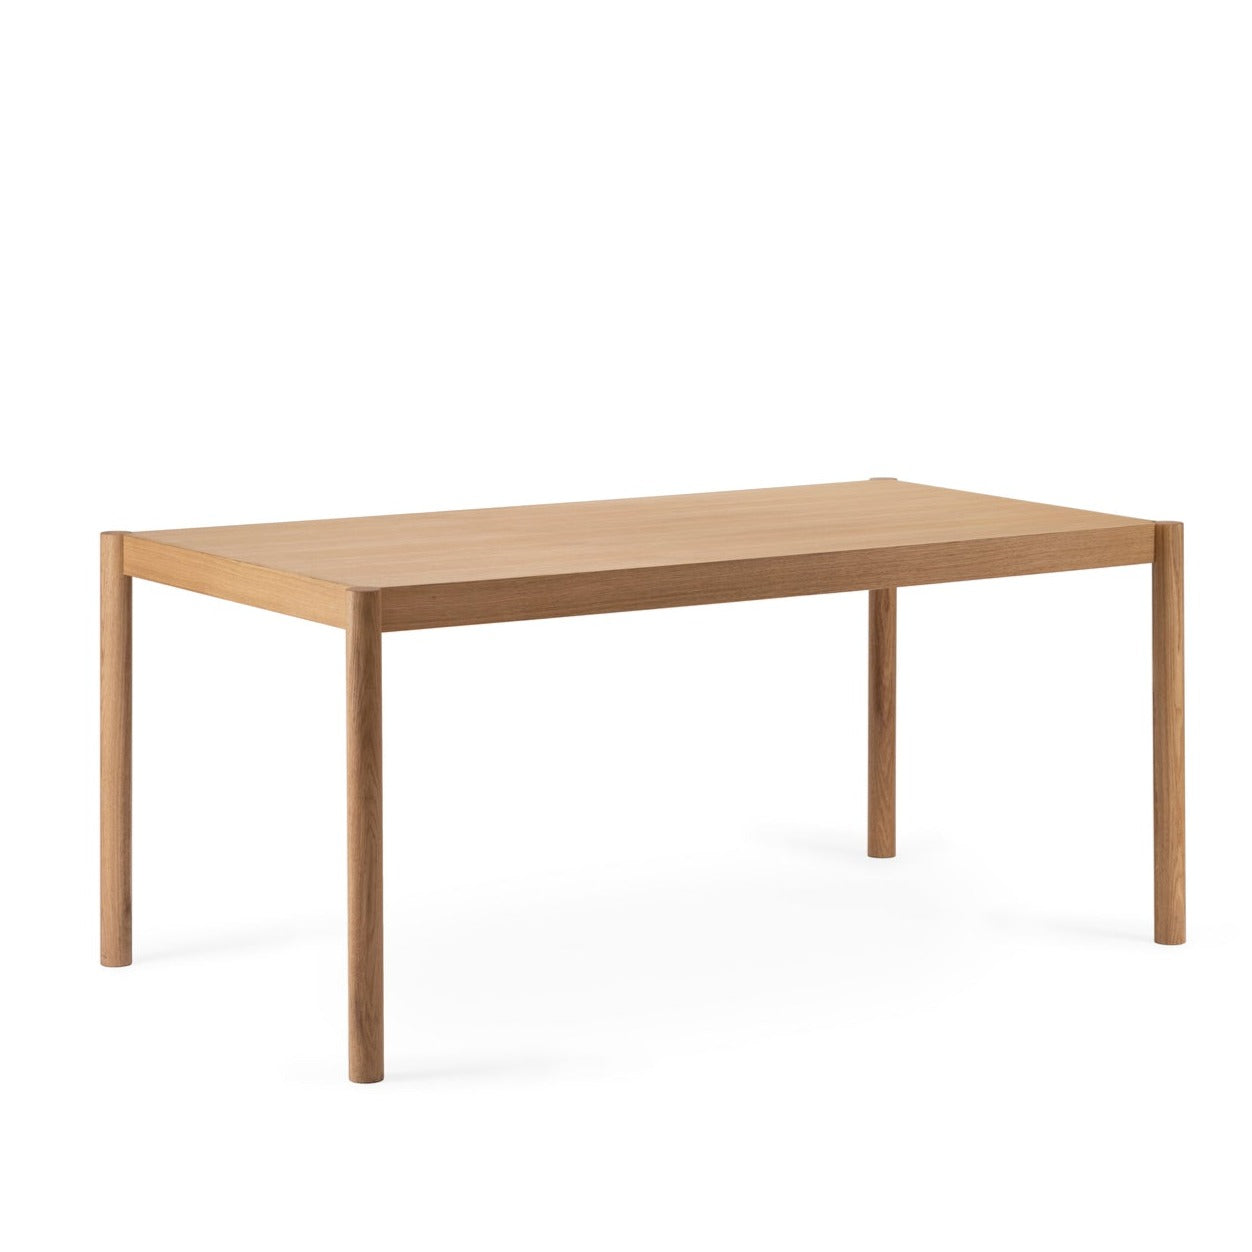 CITIZEN Dining Table-natural oak-medium size-side view